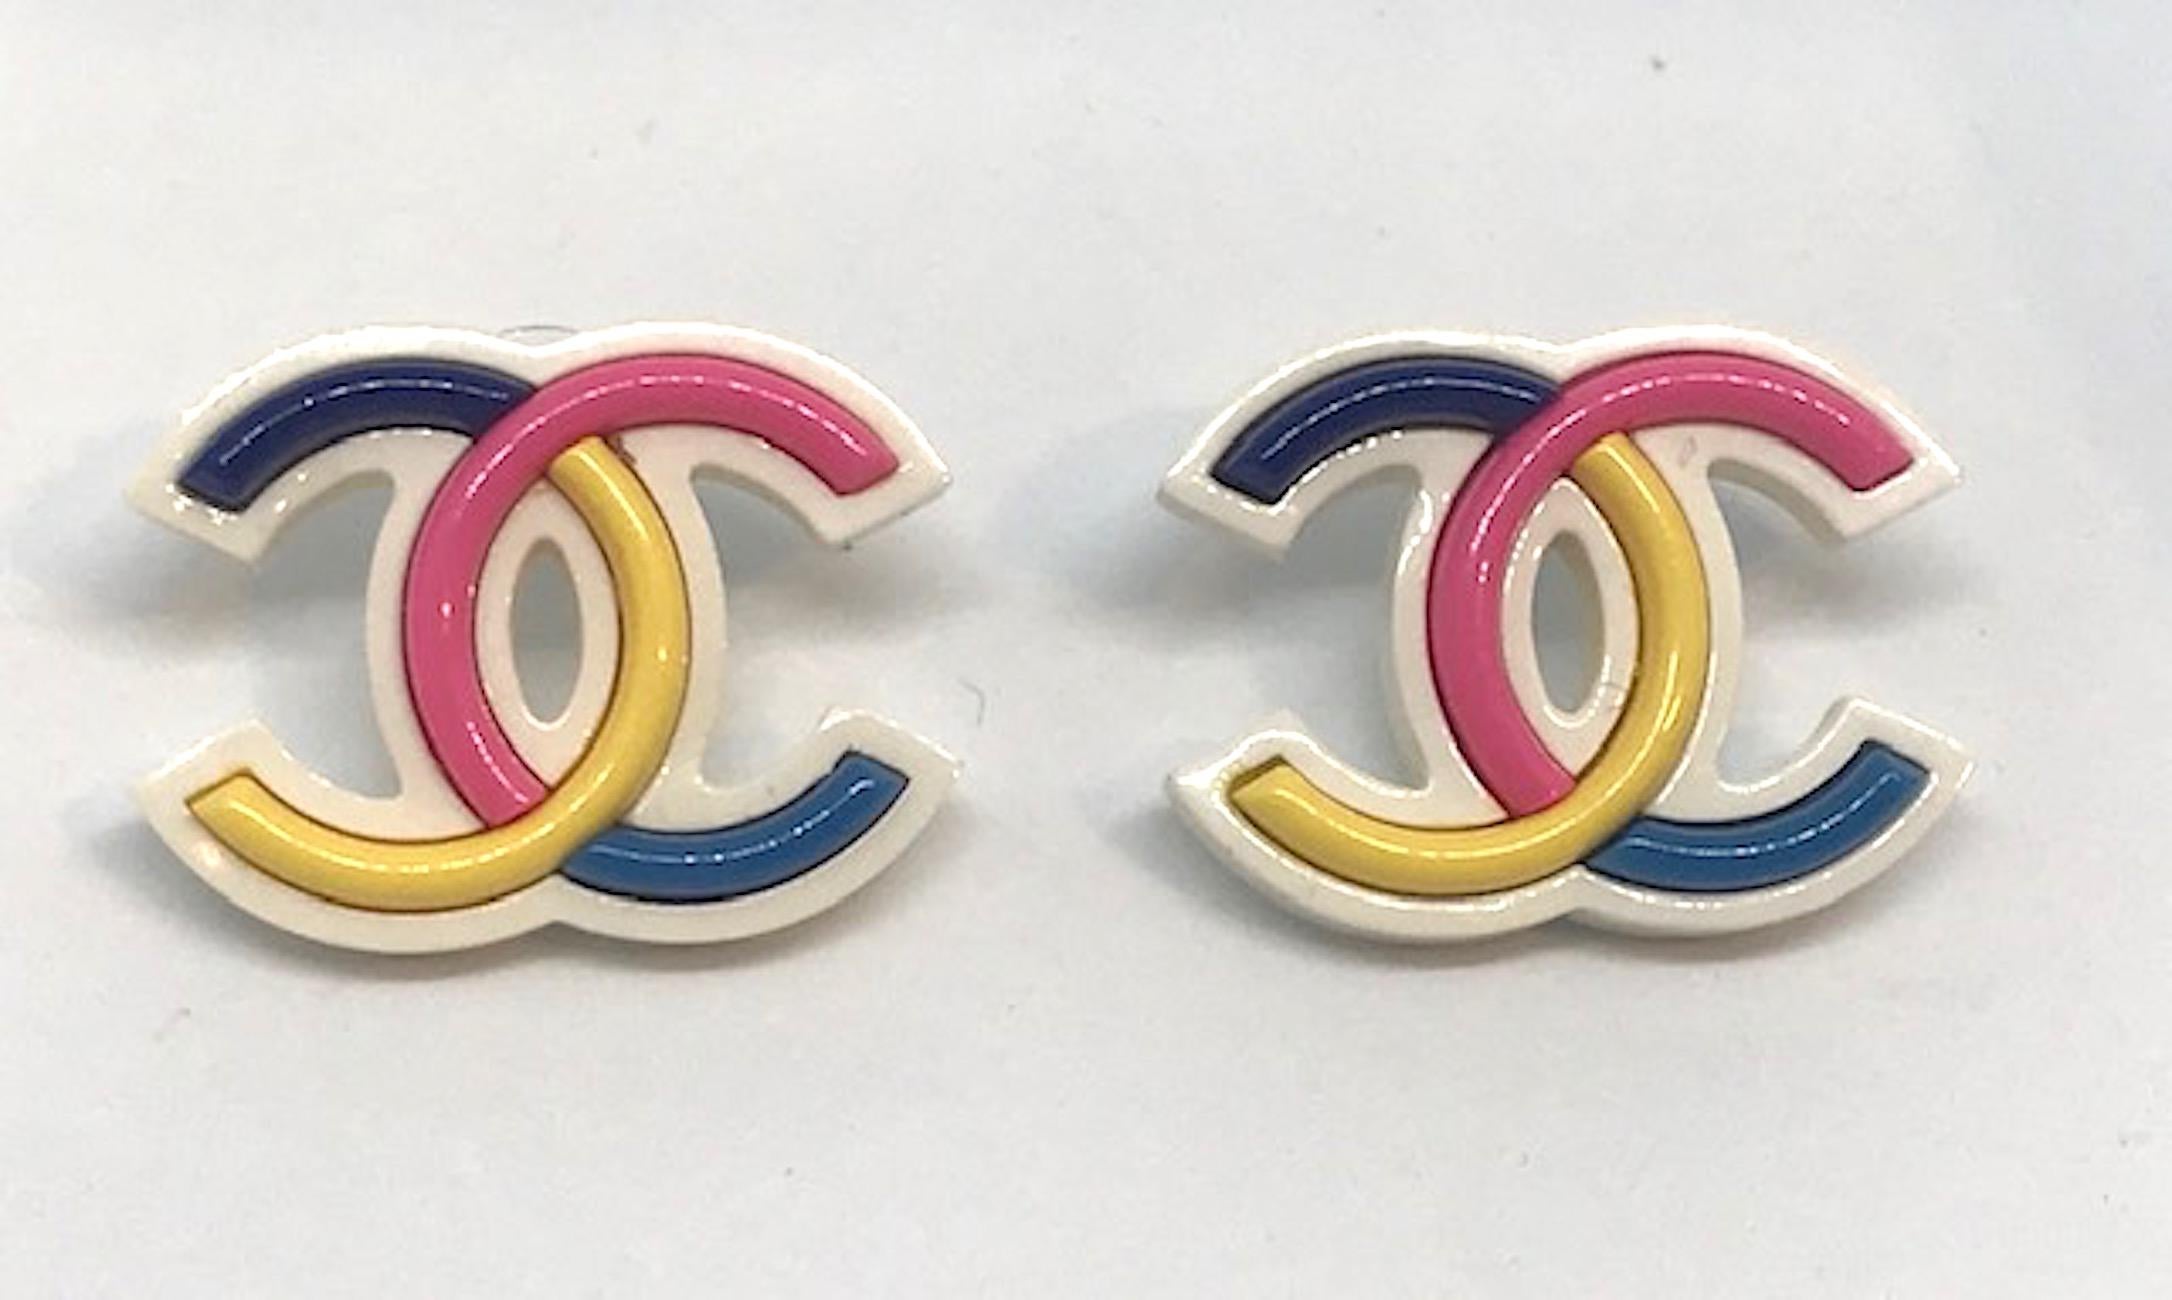 Fun and colorful with are these Chanel large logo earrings. Each lucite earring is meticulously set with black, pink, yellow and blue pieces into the white molded CC body. Each earring measures 1.5